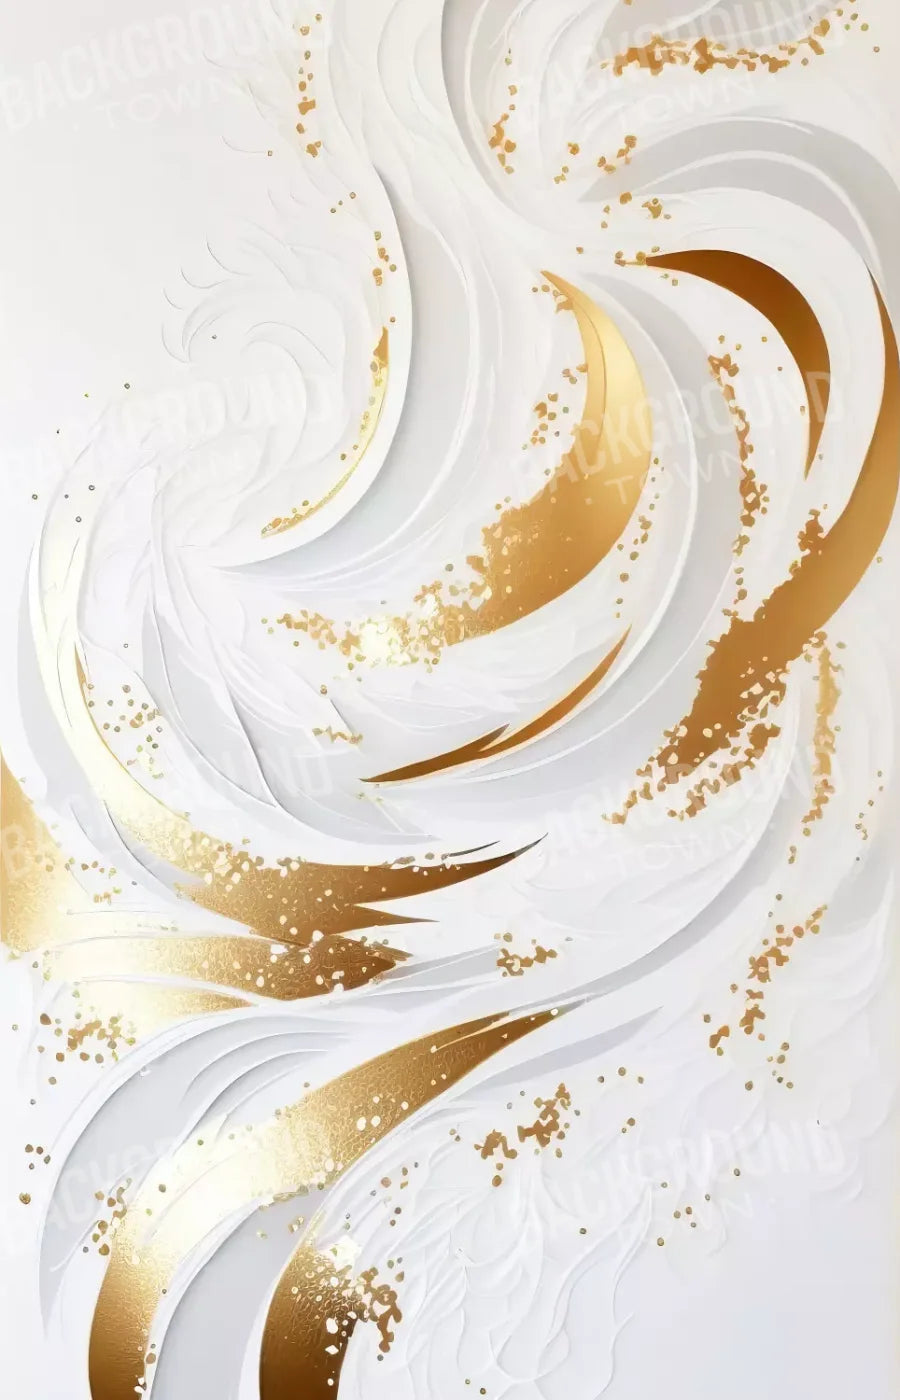 Abstract Swirl In White And Gold 8X12 Ultracloth ( 96 X 144 Inch ) Backdrop